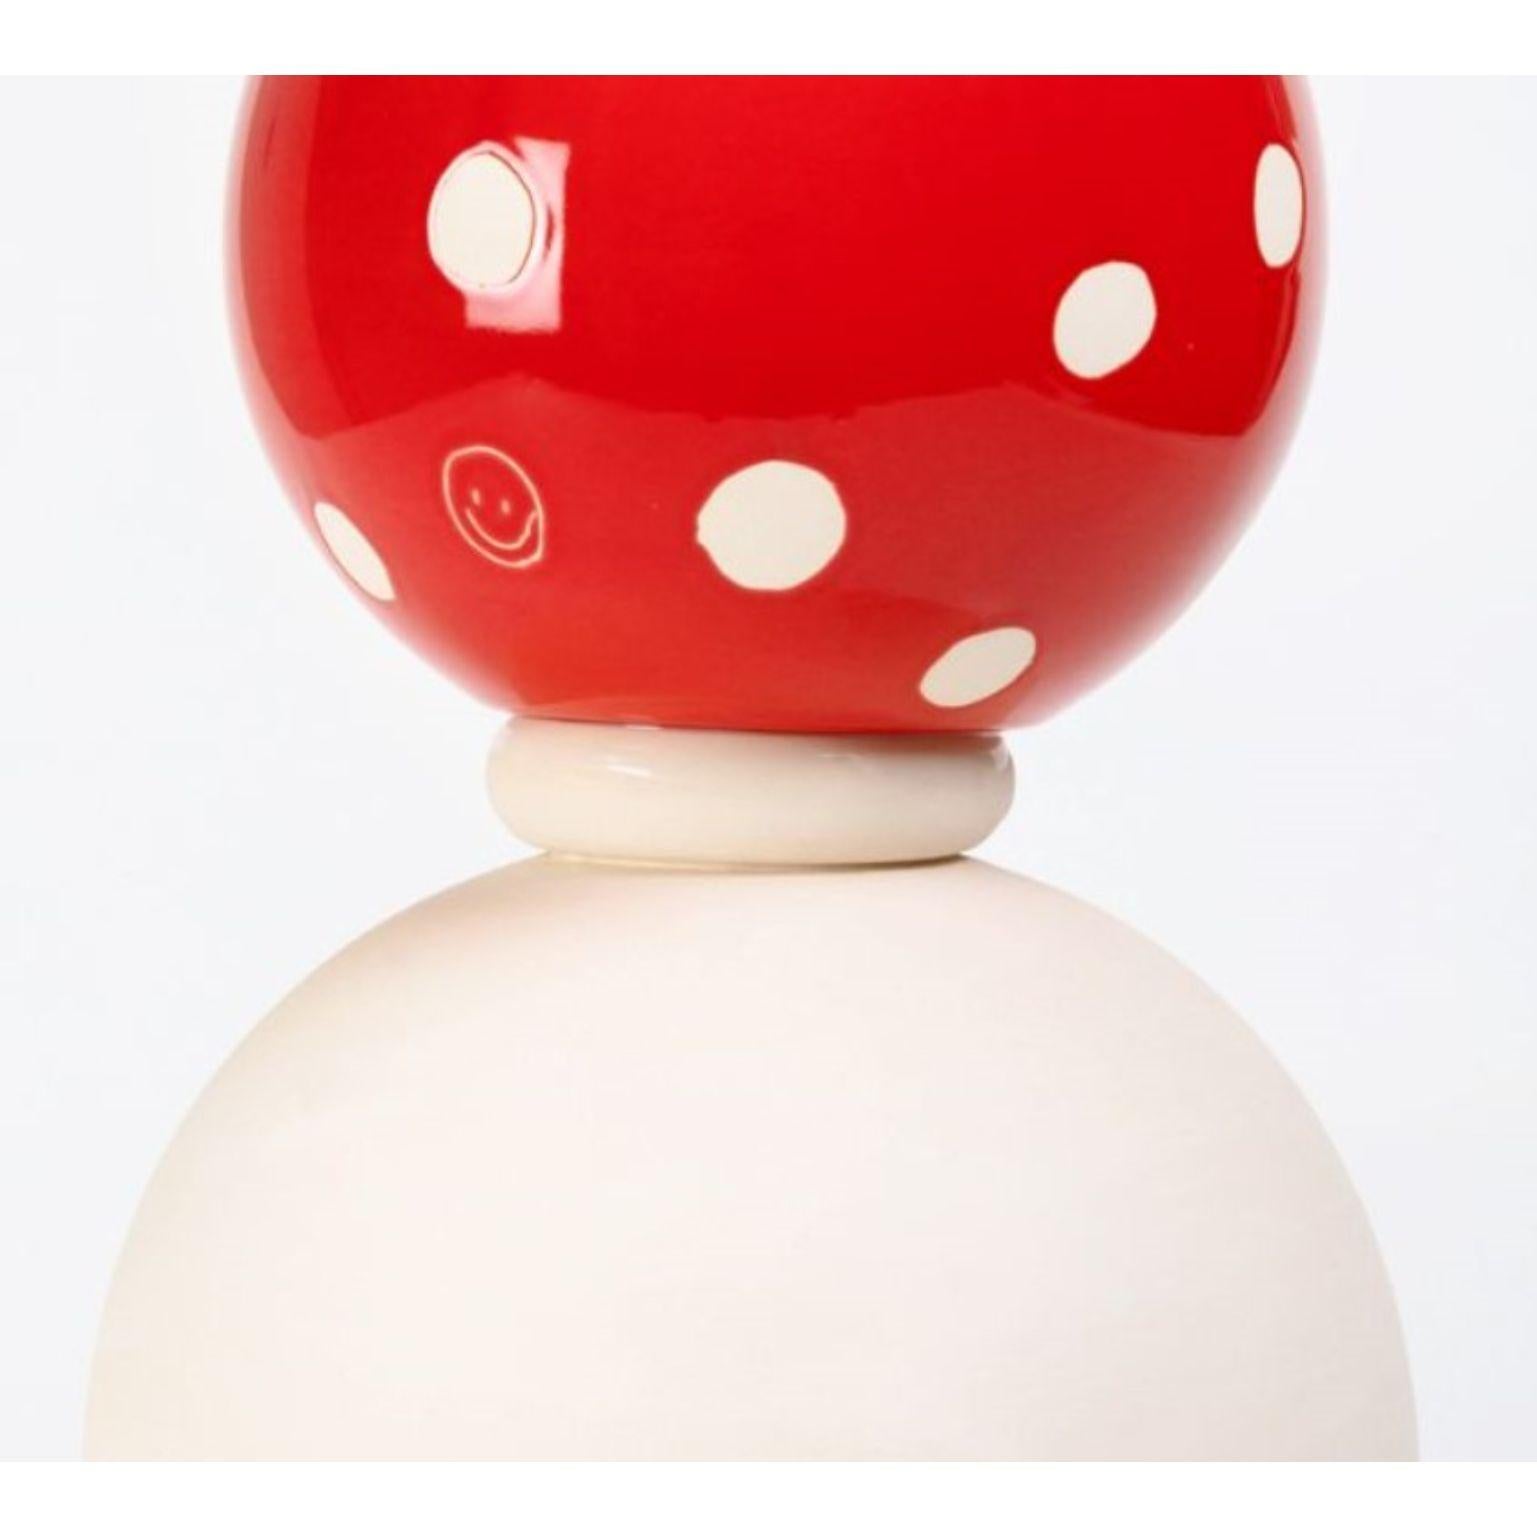 Miki Pop Ceramic Sculpture, Mushroom by Malwina Konopacka In New Condition For Sale In Geneve, CH